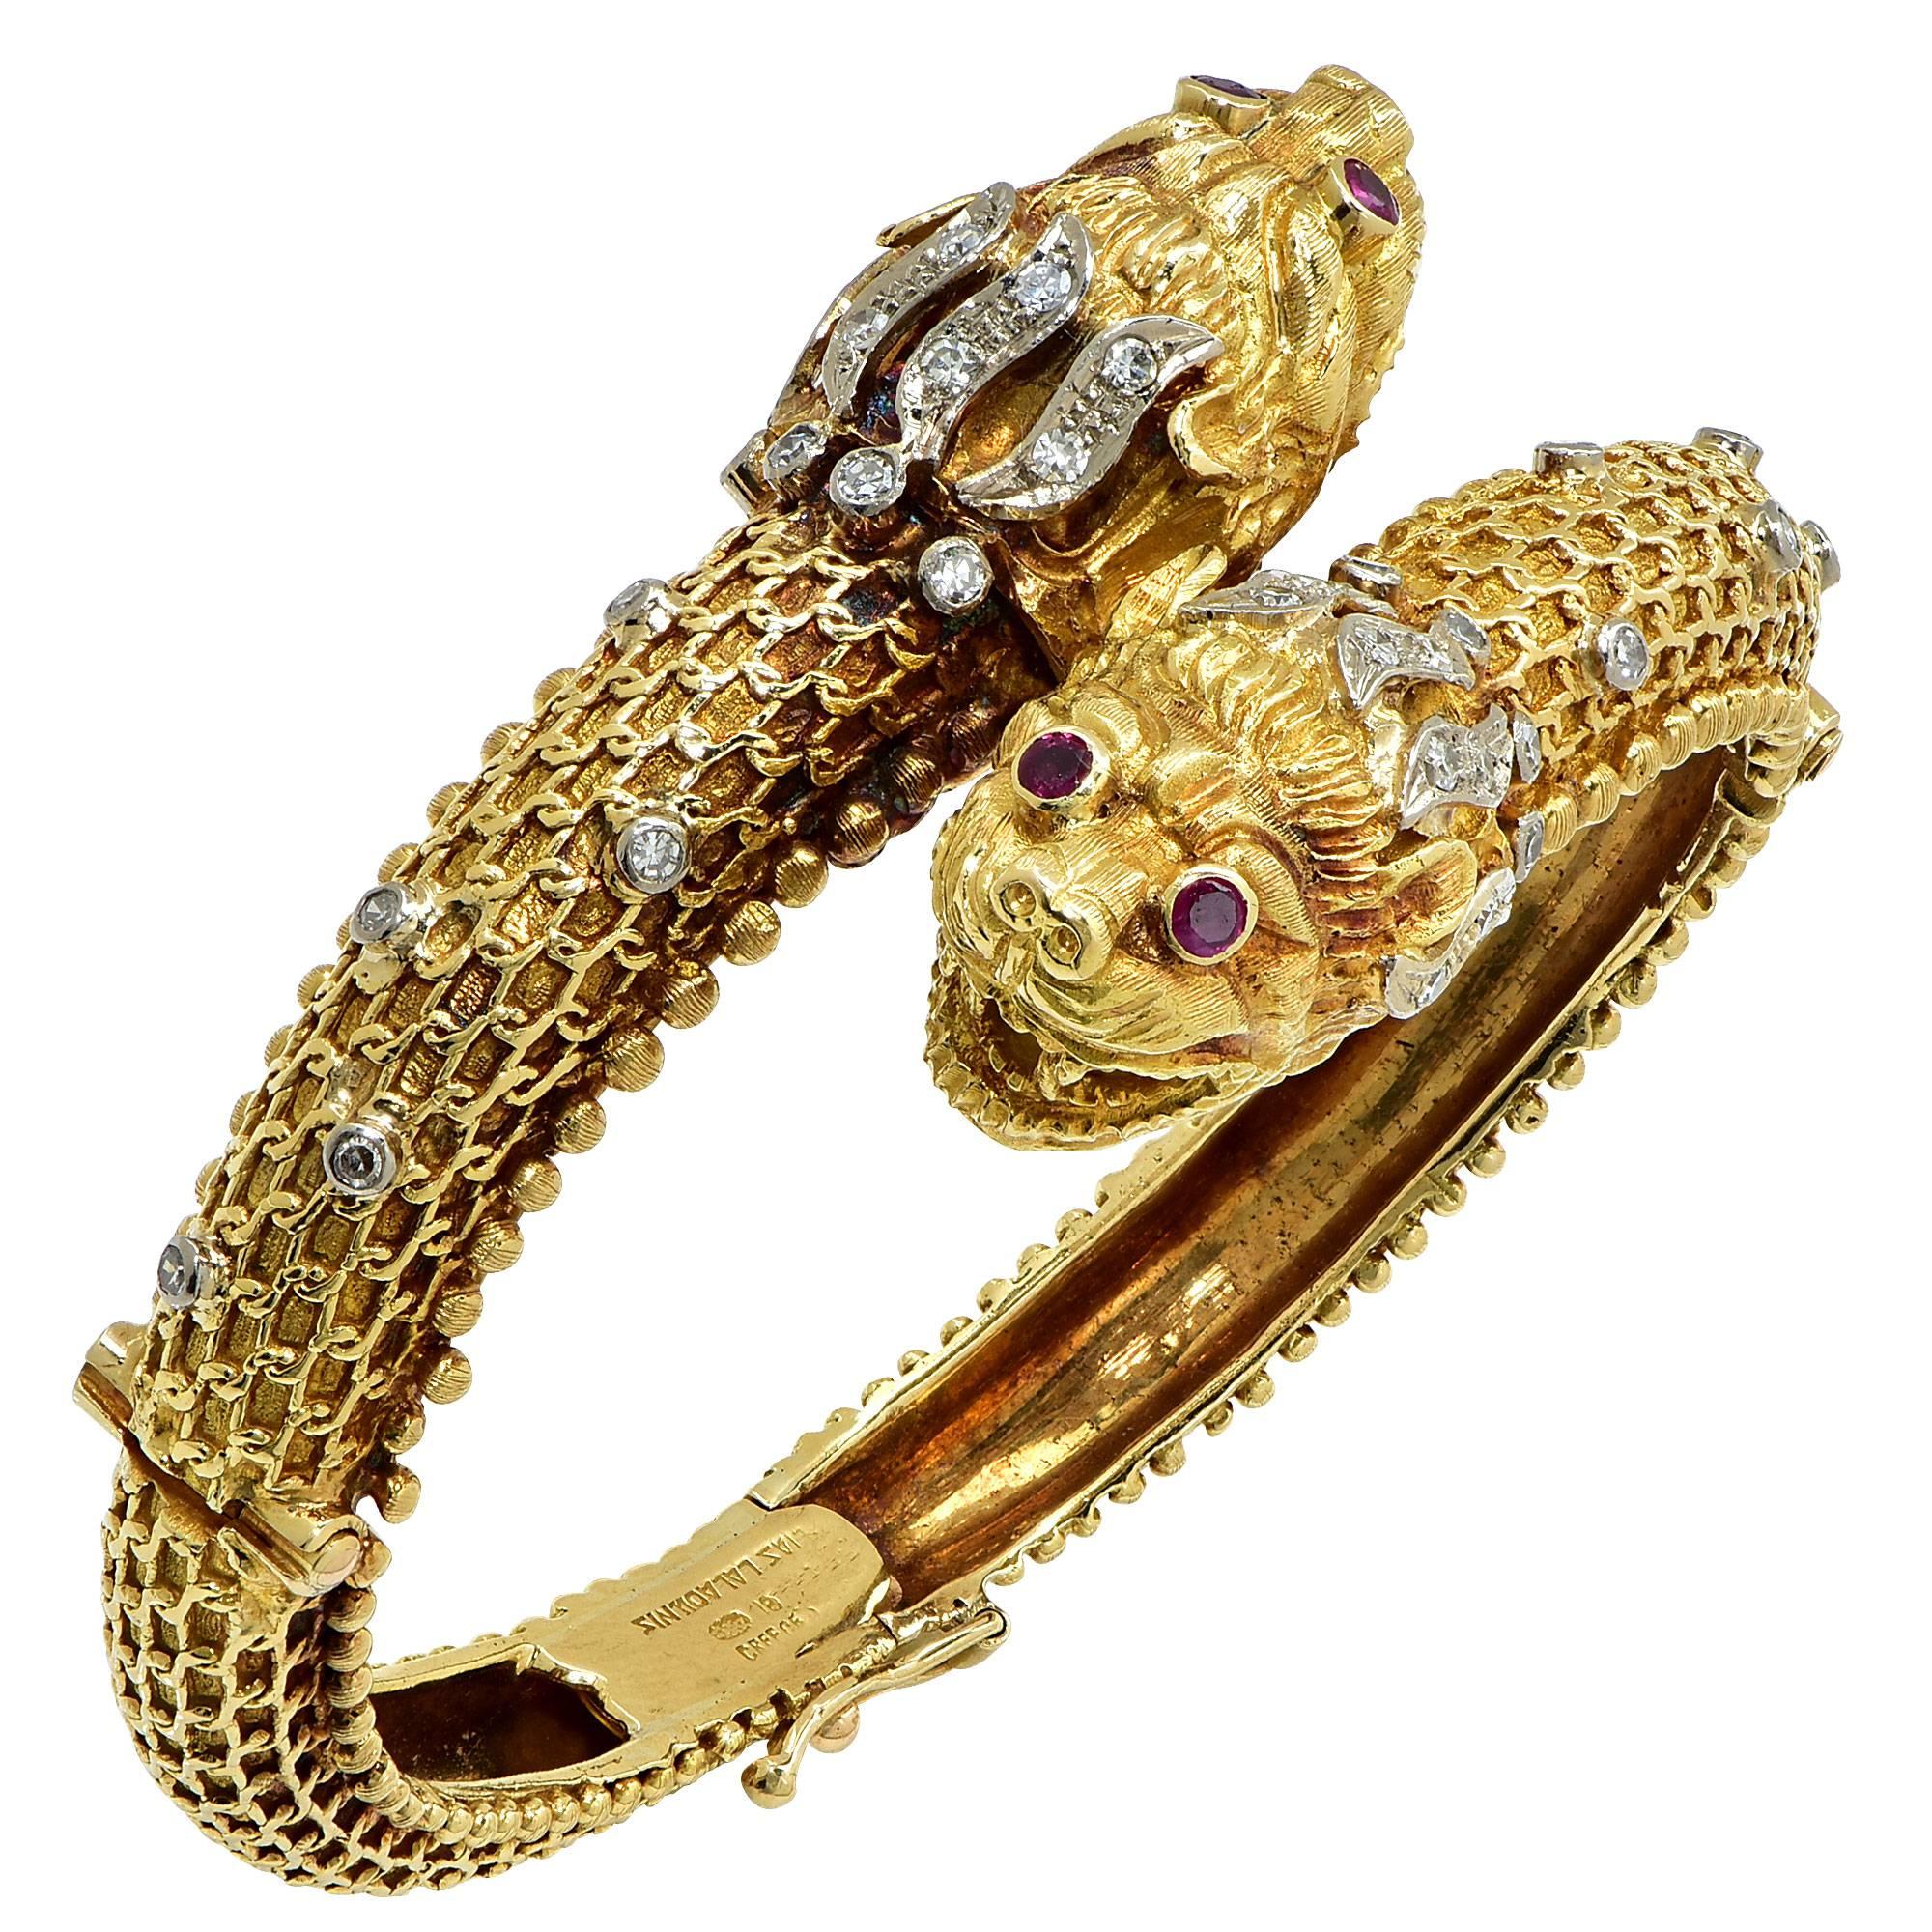 18k yellow gold bangle, created in Greece by world renowned Ilias Lalounis, containing 4 round cut rubies weighing approximately .30cts and 34 single cut diamonds weighing approximately .70cts.

It is stamped and tested as 18k gold.
This unique